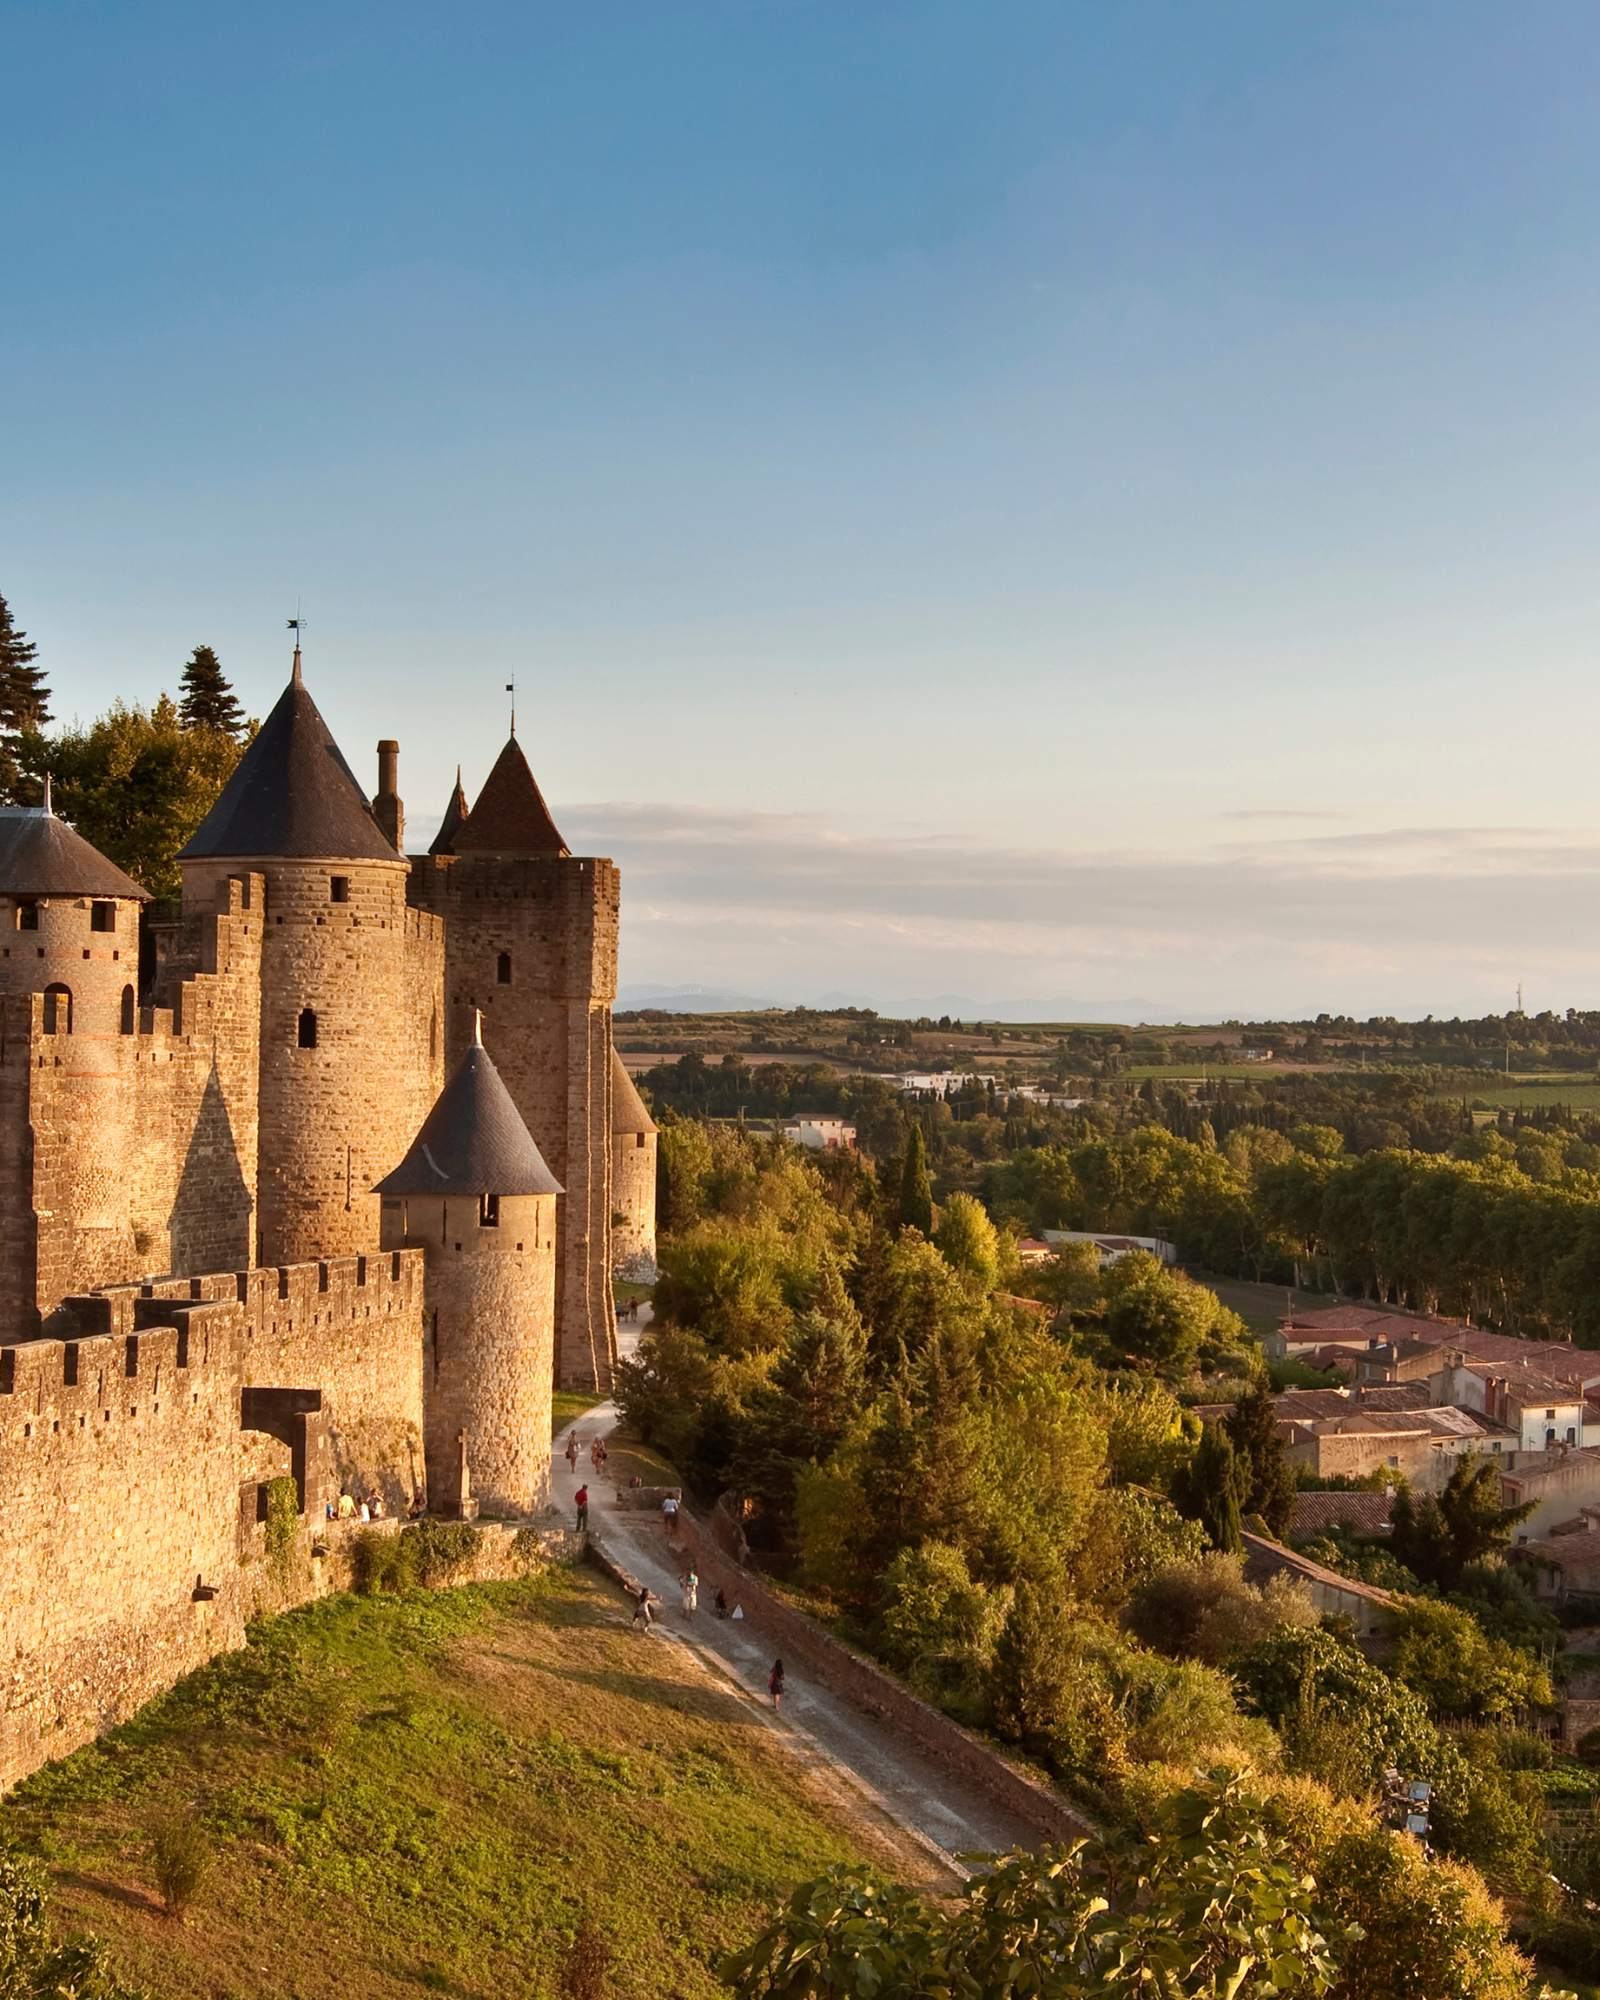 Reasons to visit Carcassonne